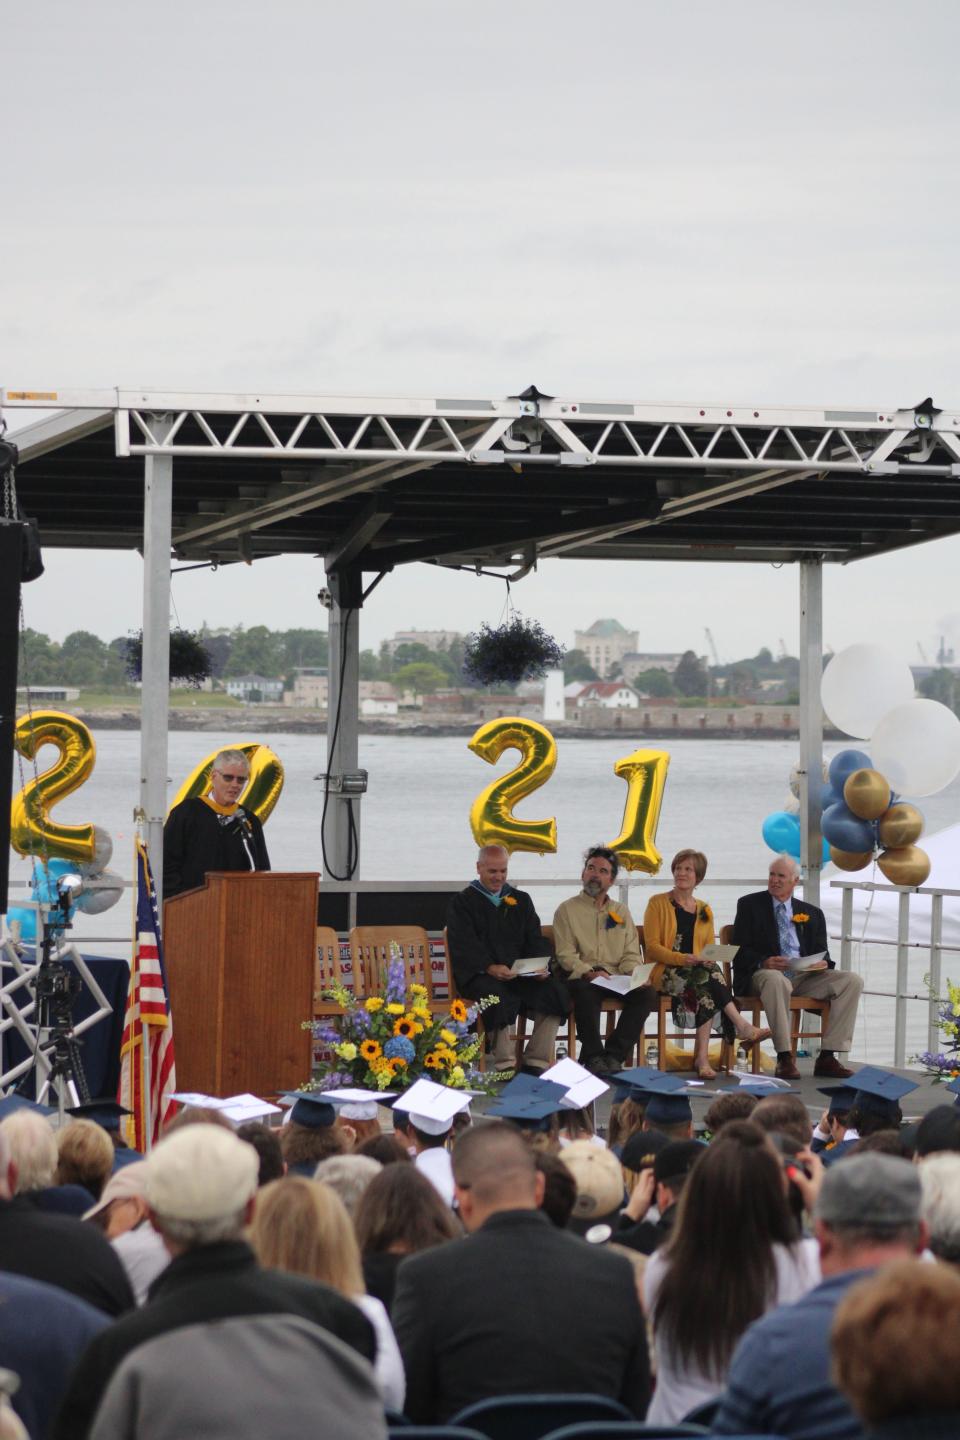 R.W. Traip Academy principal John Drisko is seen here delivering a graduation speech at Fort Foster in June 2021. Drisko announced last month that he will be retiring at the end of the school year after serving five years in the position.